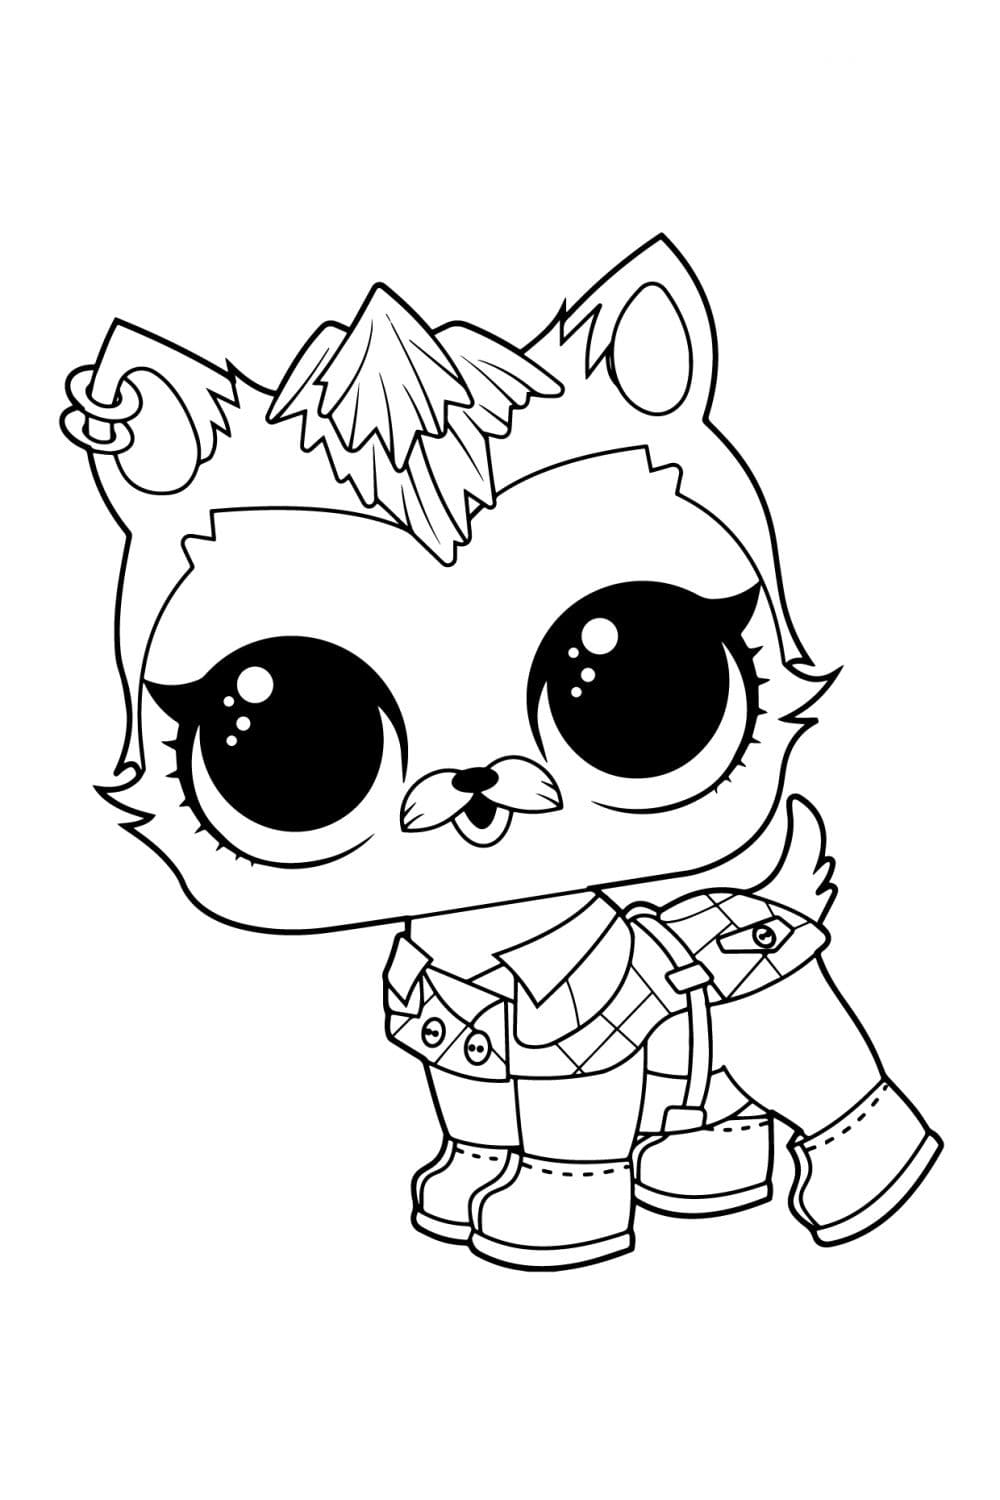 LOL Pets Puppy Scout Coloring Page - Free Printable Coloring Pages for Kids